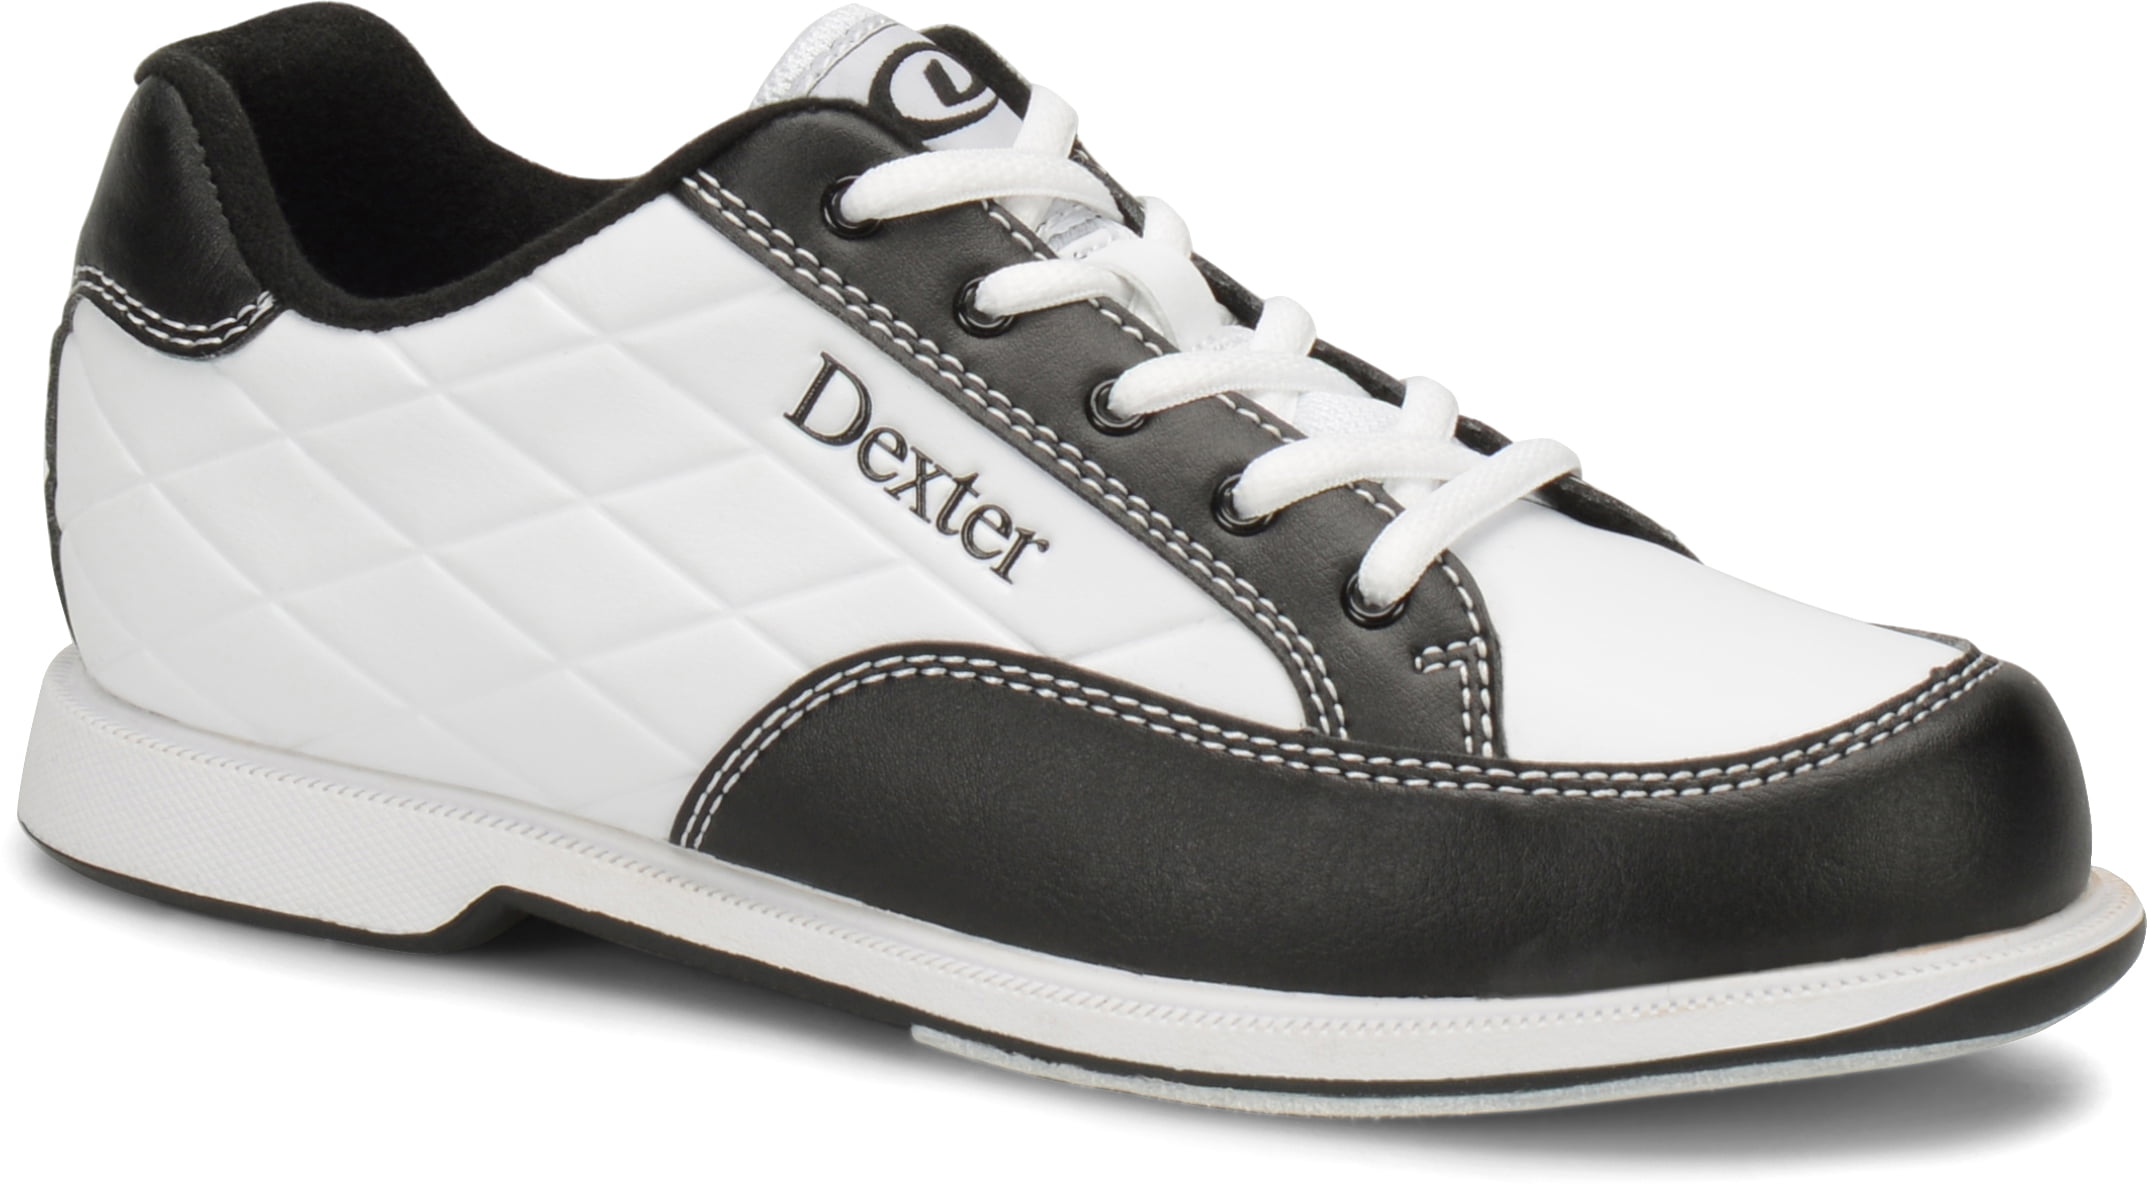 womens wide width bowling shoes